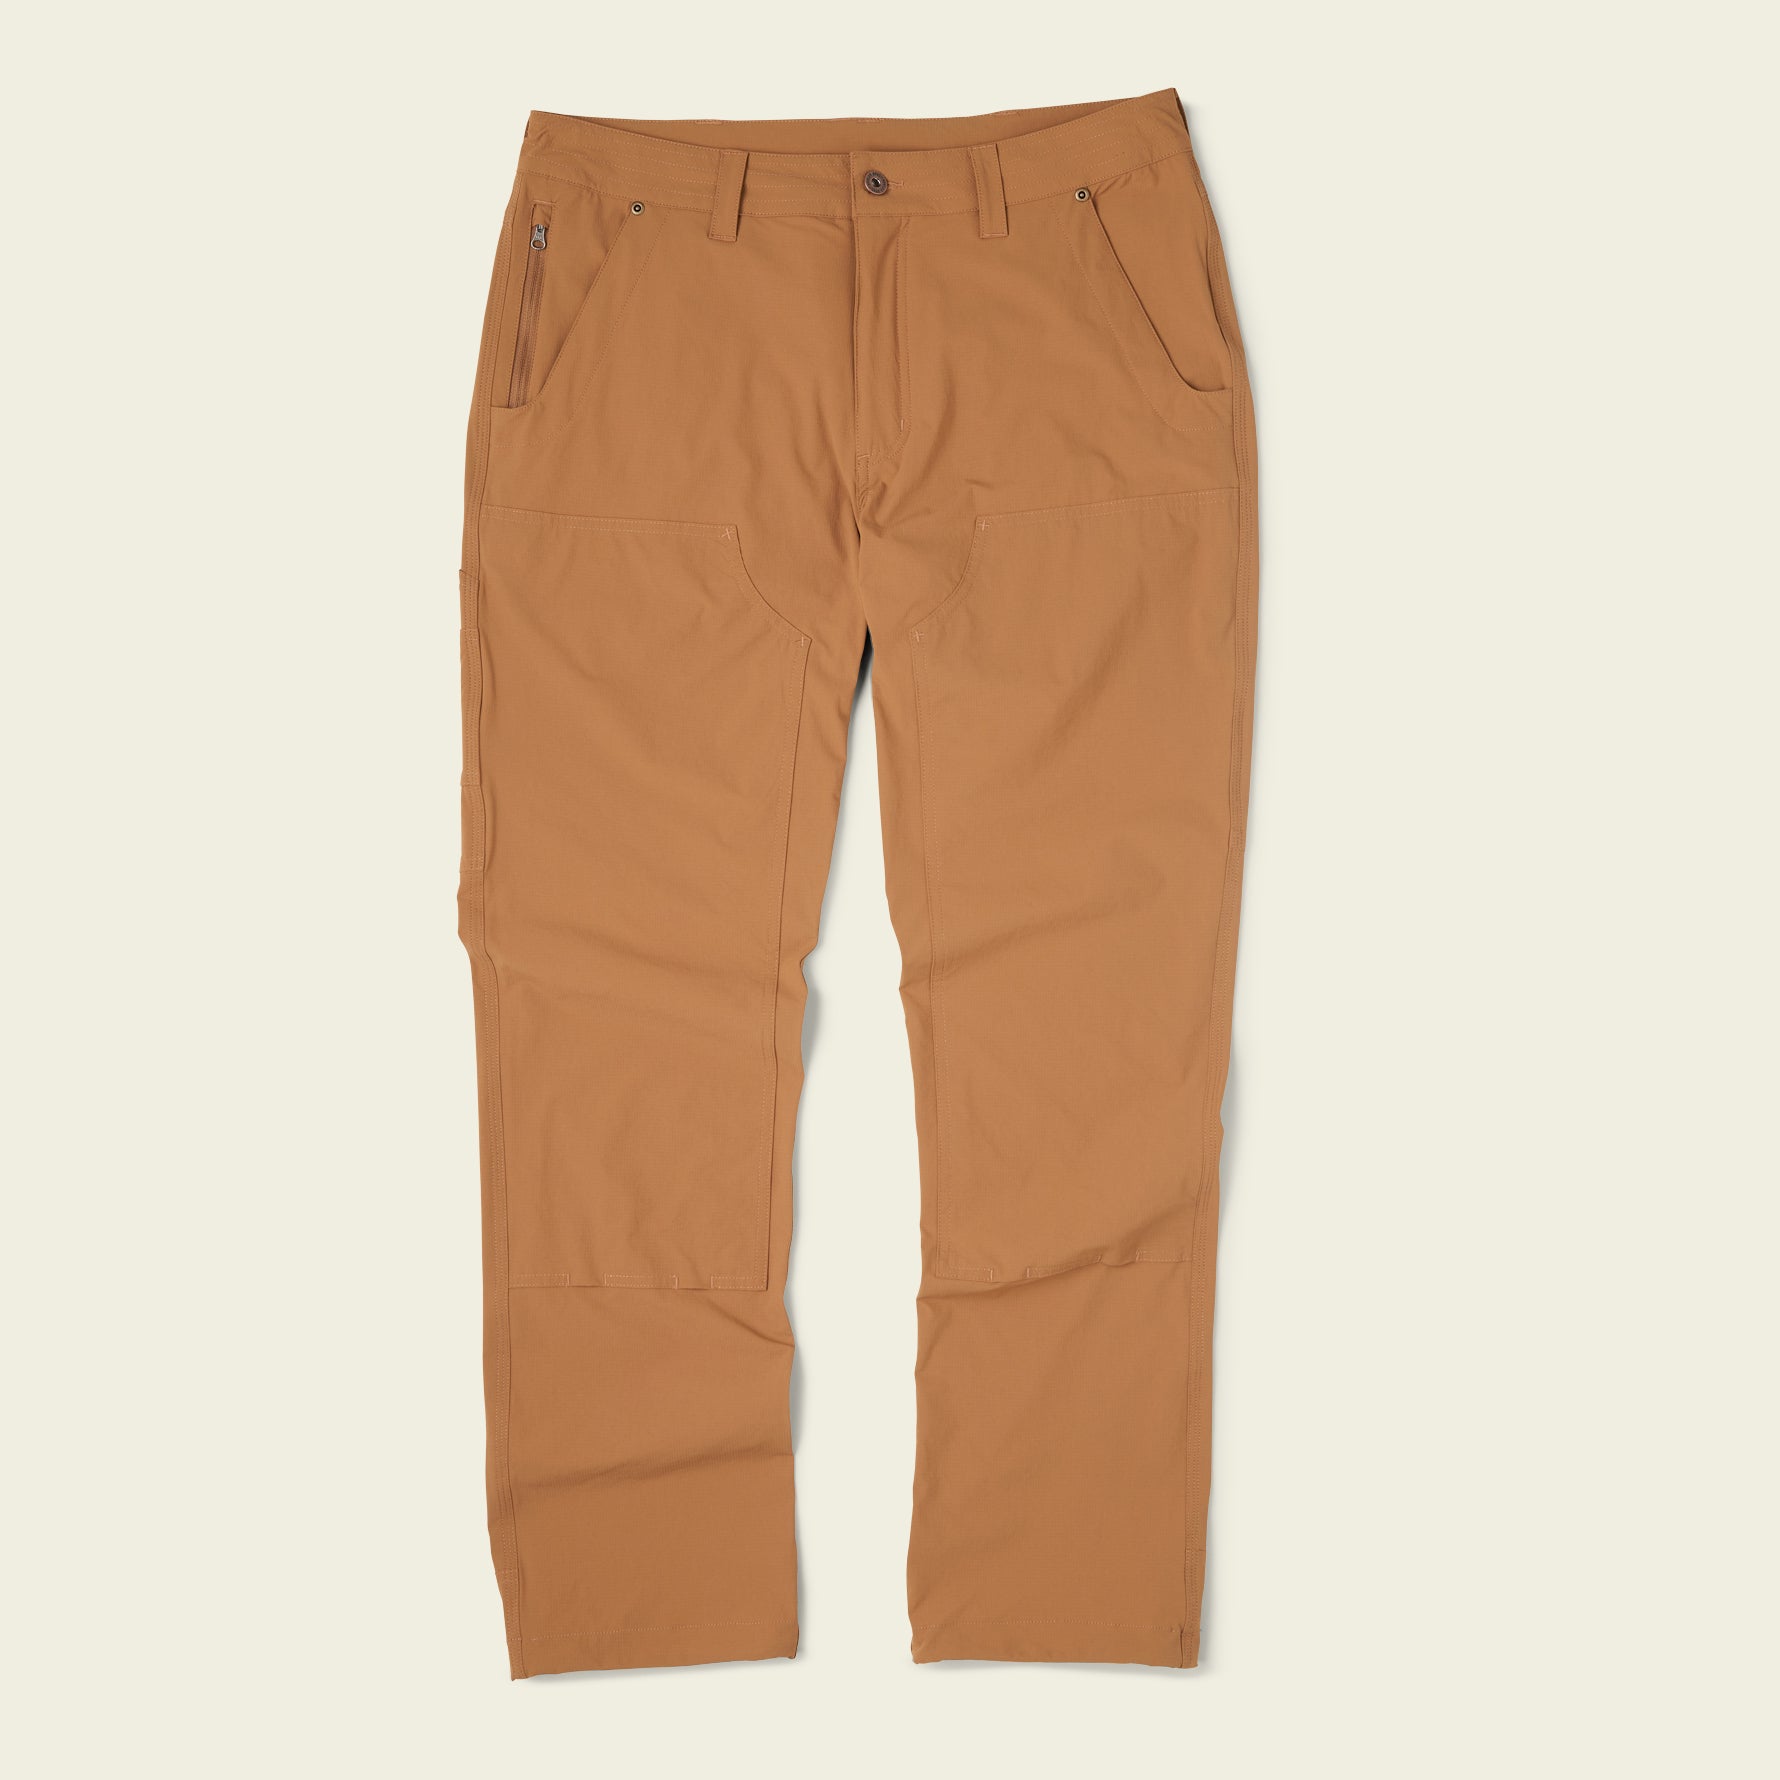 Simple pants for sun protection?  Dedicated To The Smallest Of Skiffs